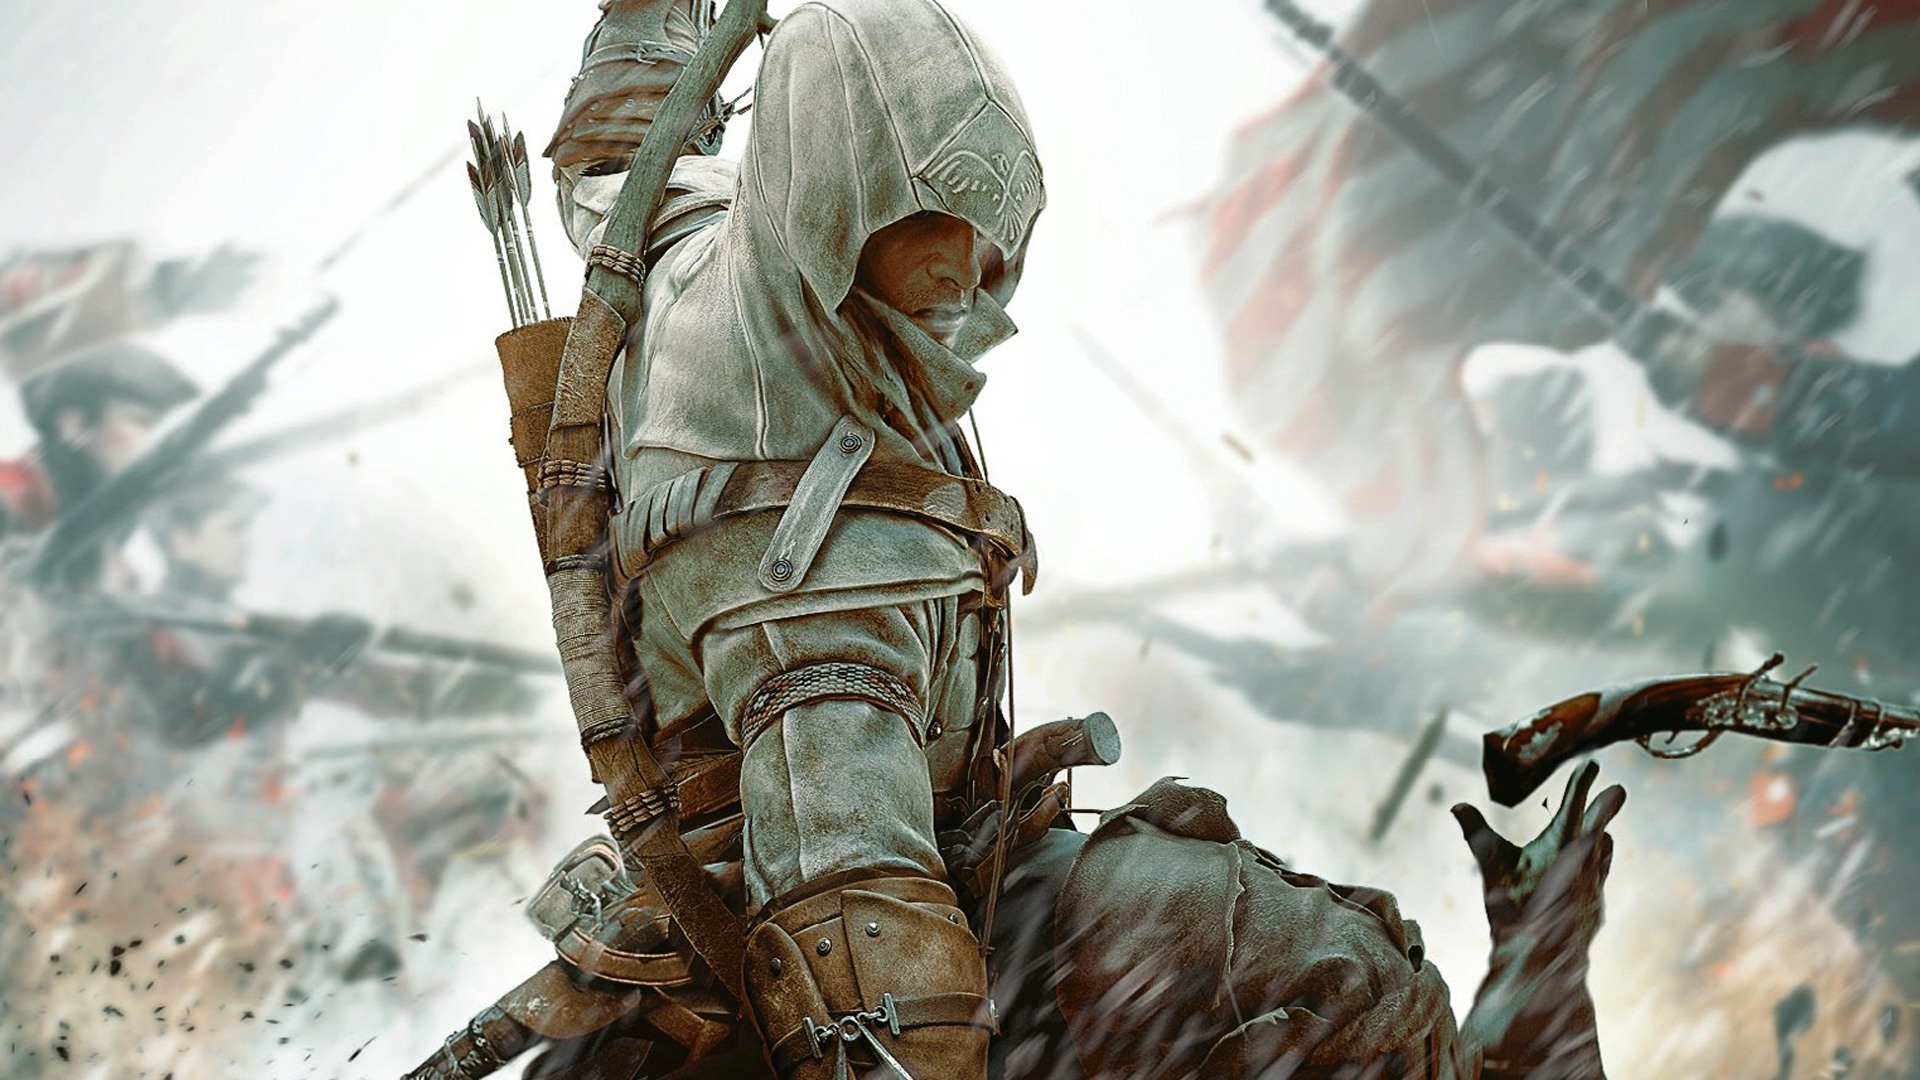 Assassin's Creed 3 HD wallpapers #18 - 1920x1080